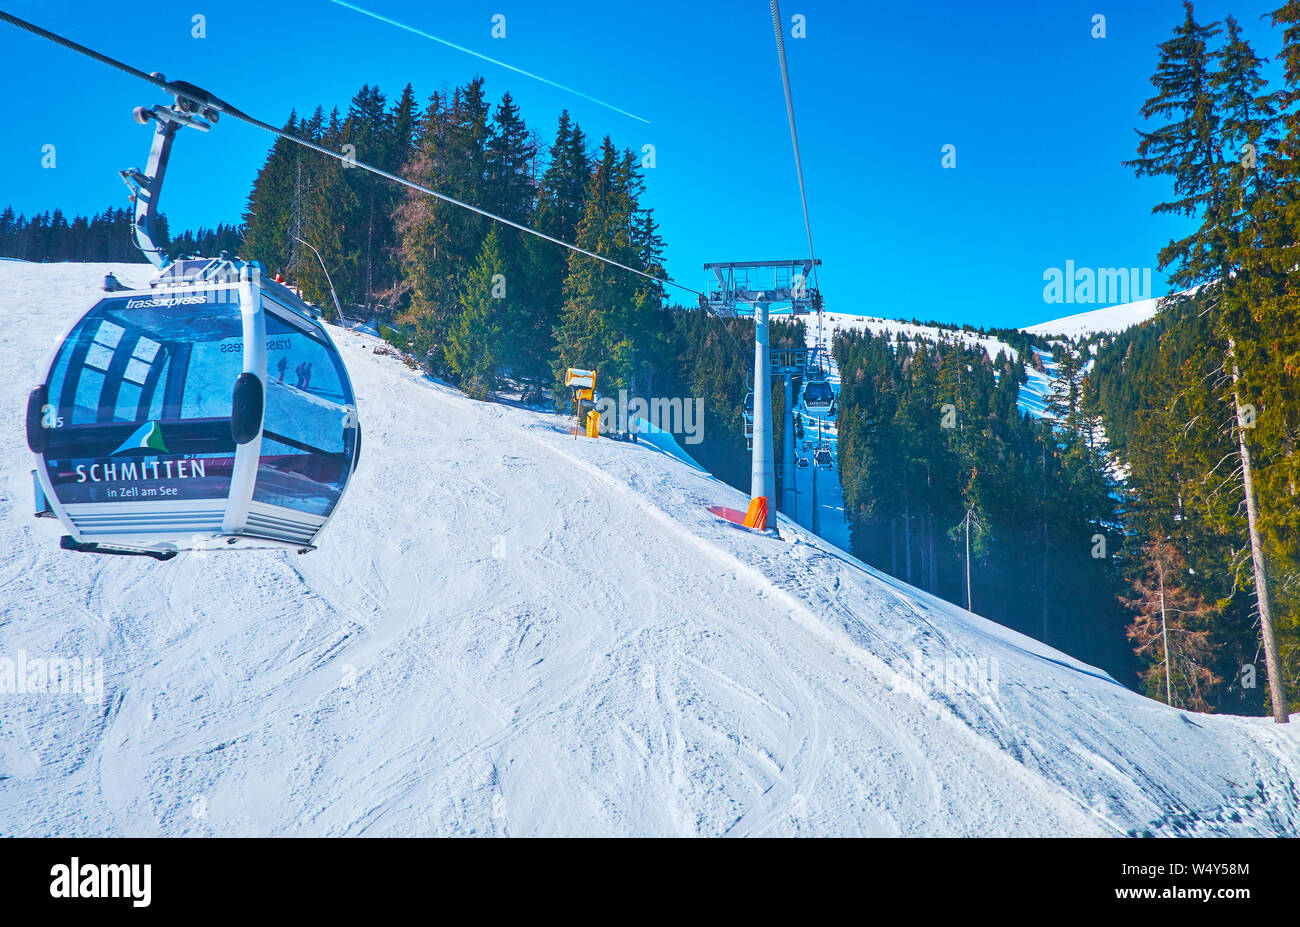 ZELL AM SEE, AUSTRIA - FEBRUARY 28, 2019: The fast gondolas of Trassxpress cable car ride along the slopes of Schmitten mount, covered with wide ski r Stock Photo